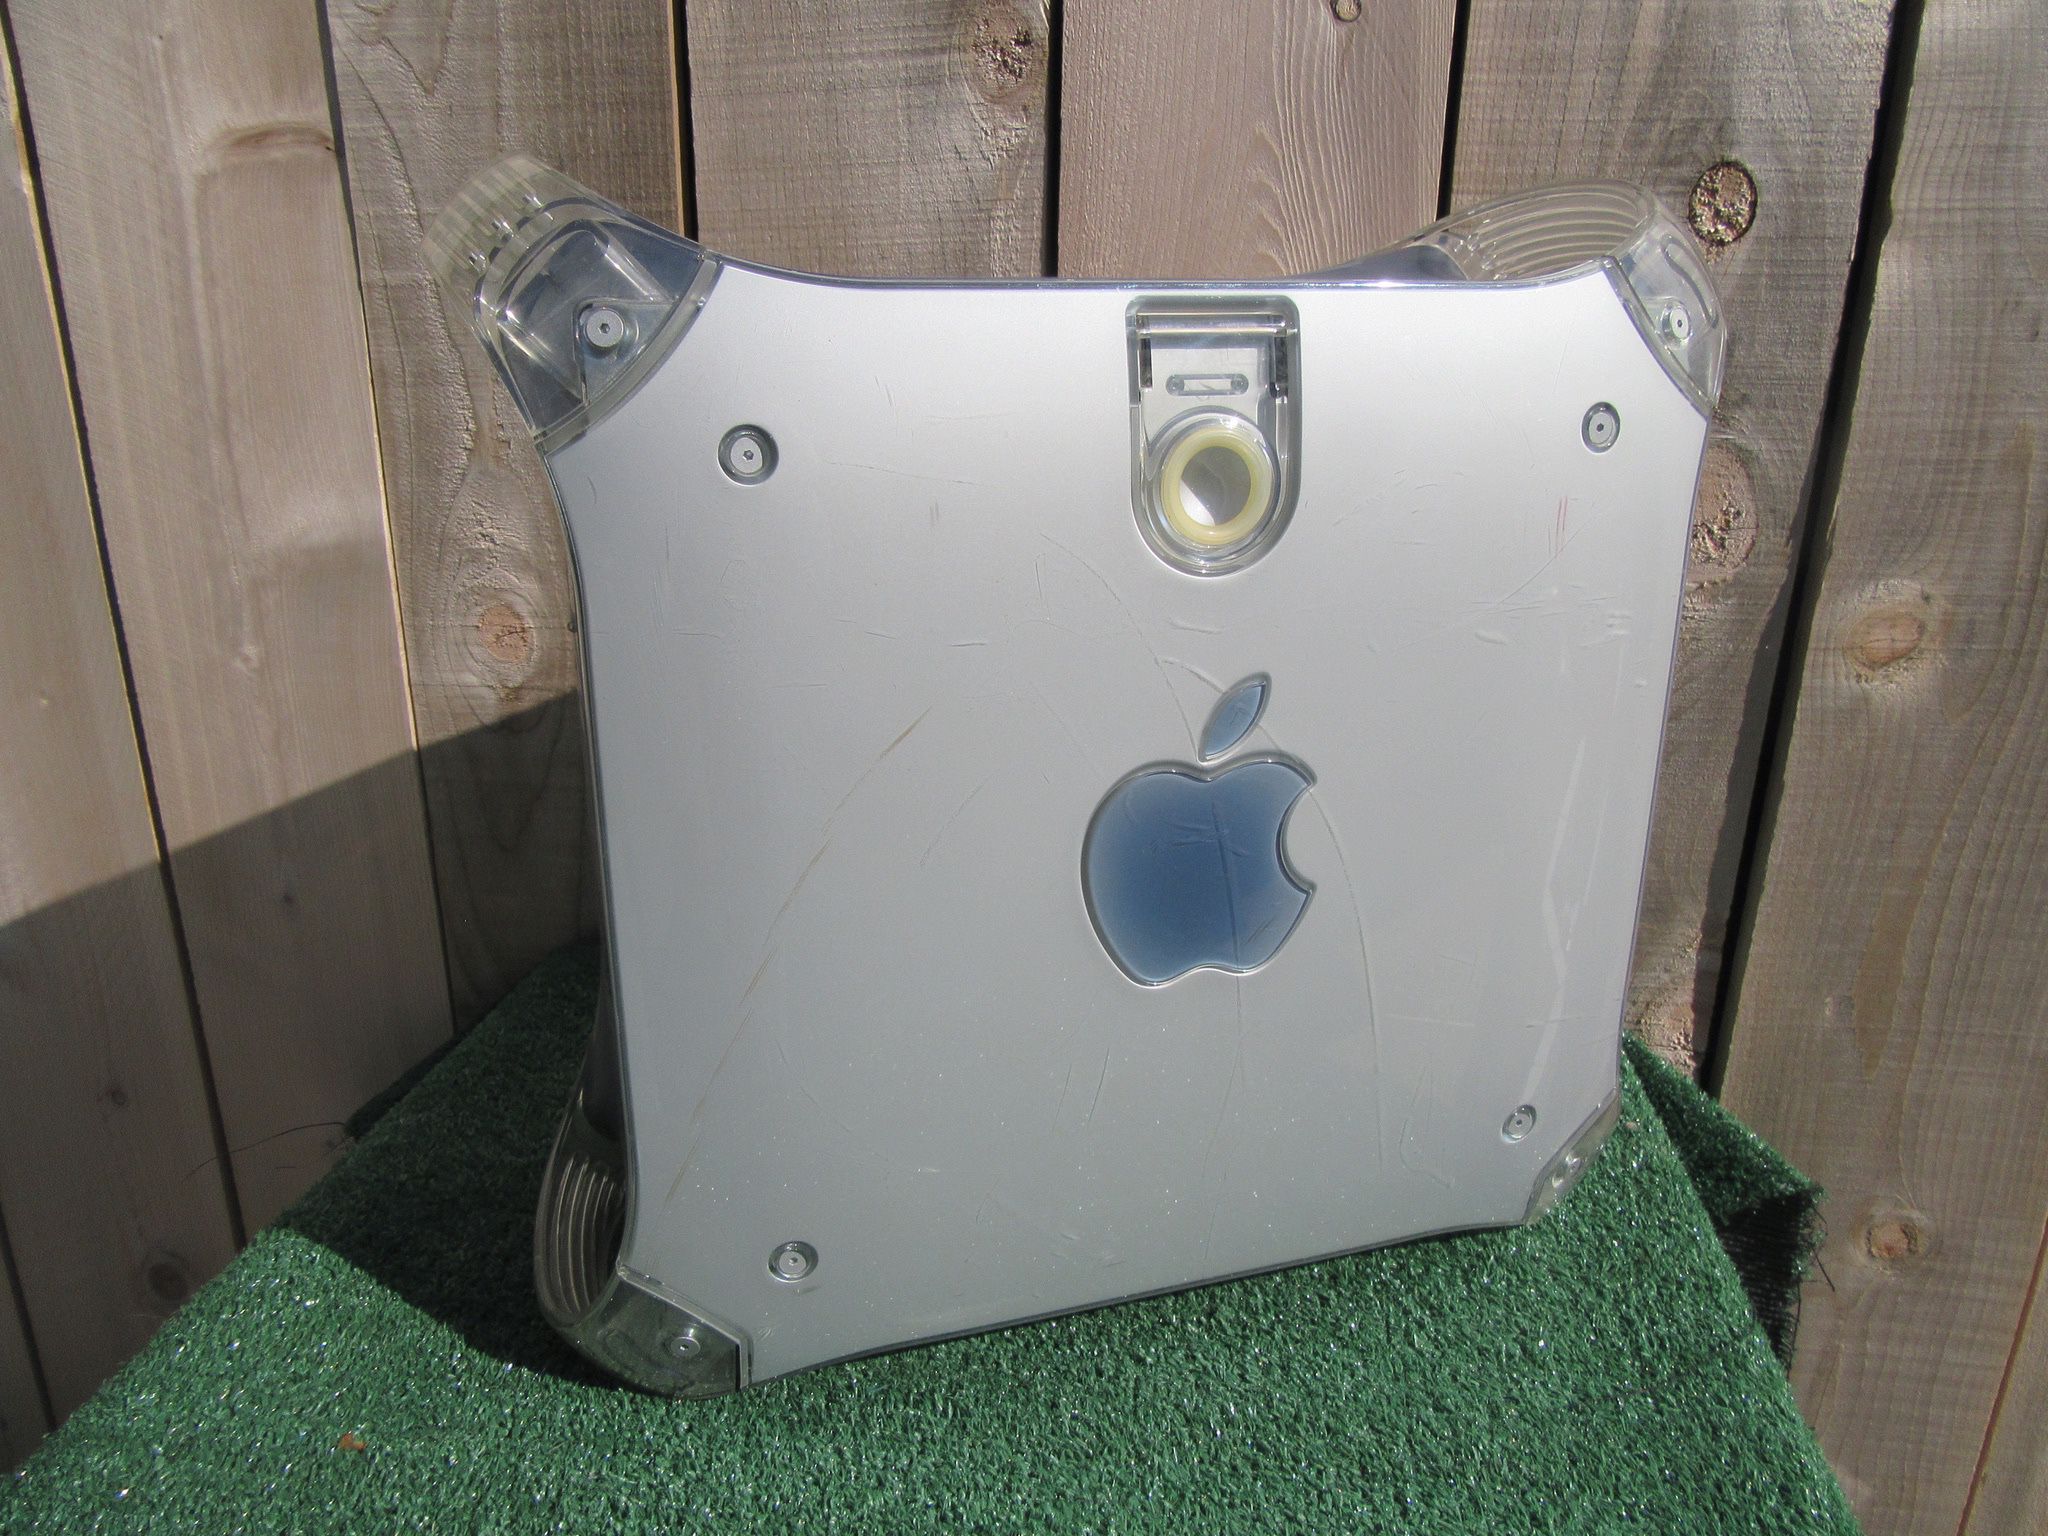 Apple Power Mac G4 Tower Computer Untested For Parts